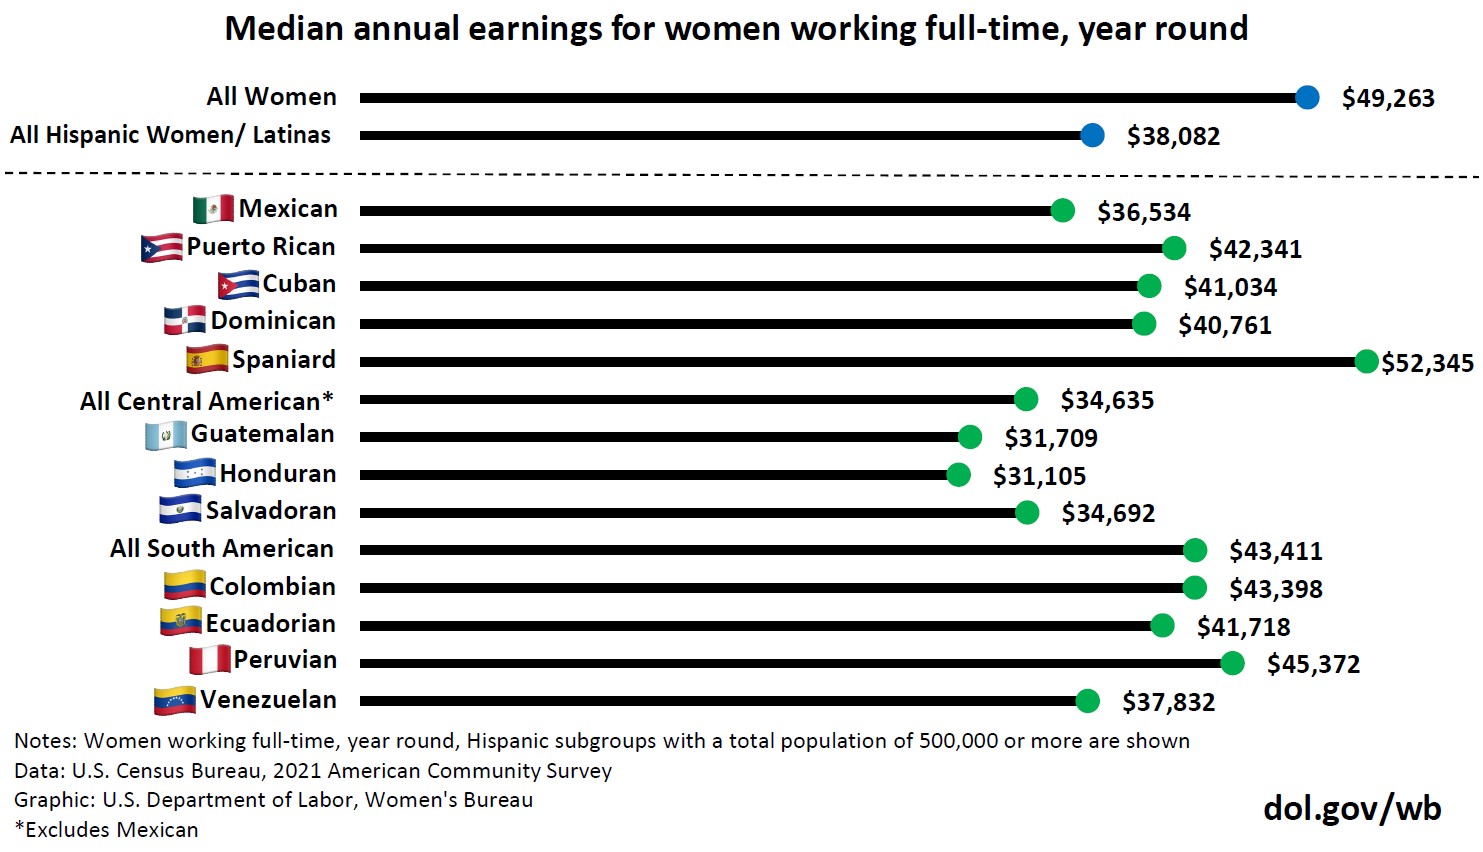 Median annual earnings for women working full time, year-round among Hispanic subpopulations. Only subpopulations with a total population of 500,000 or more are shown. This data is from the 2021 U.S. Census Bureau American Community Survey.